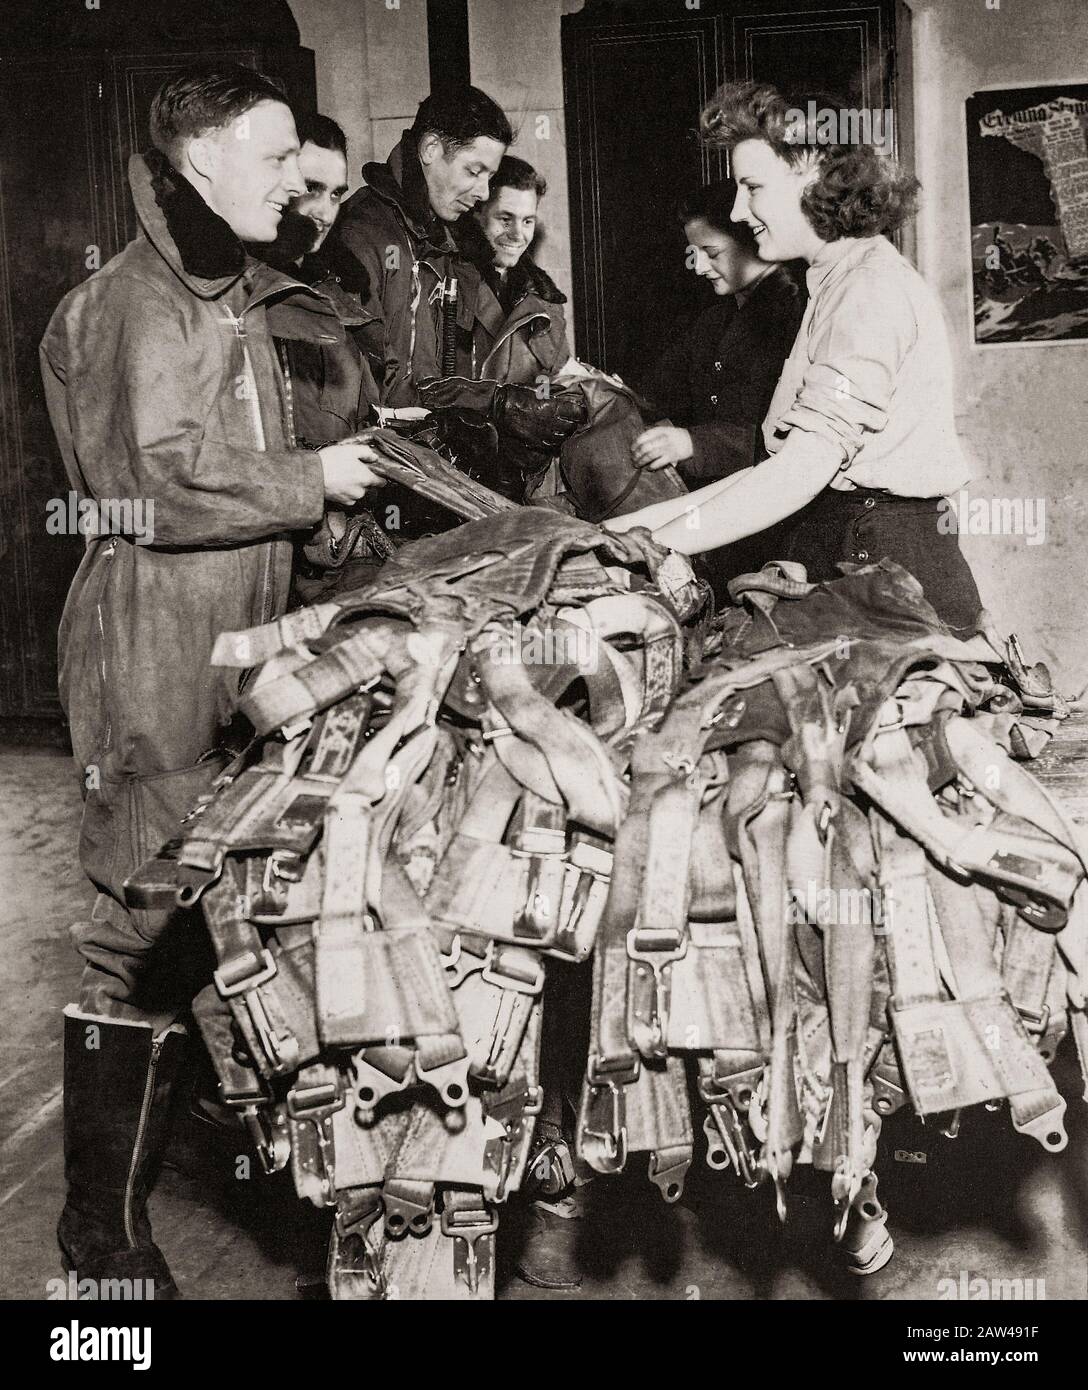 Parachute packers of the WAAF with air crew. The WAAF (Women's Auxiliary Air Force) was created on 28 June 1939,  and women recruited into the WAAF were given basic training. WAAFs did not serve as aircrew, but were active in parachute packing and the crewing of barrage balloons in addition to performing catering, meteorology, radar, aircraft maintenance, transport, communications duties including wireless telephonic and telegraphic operation. Stock Photo